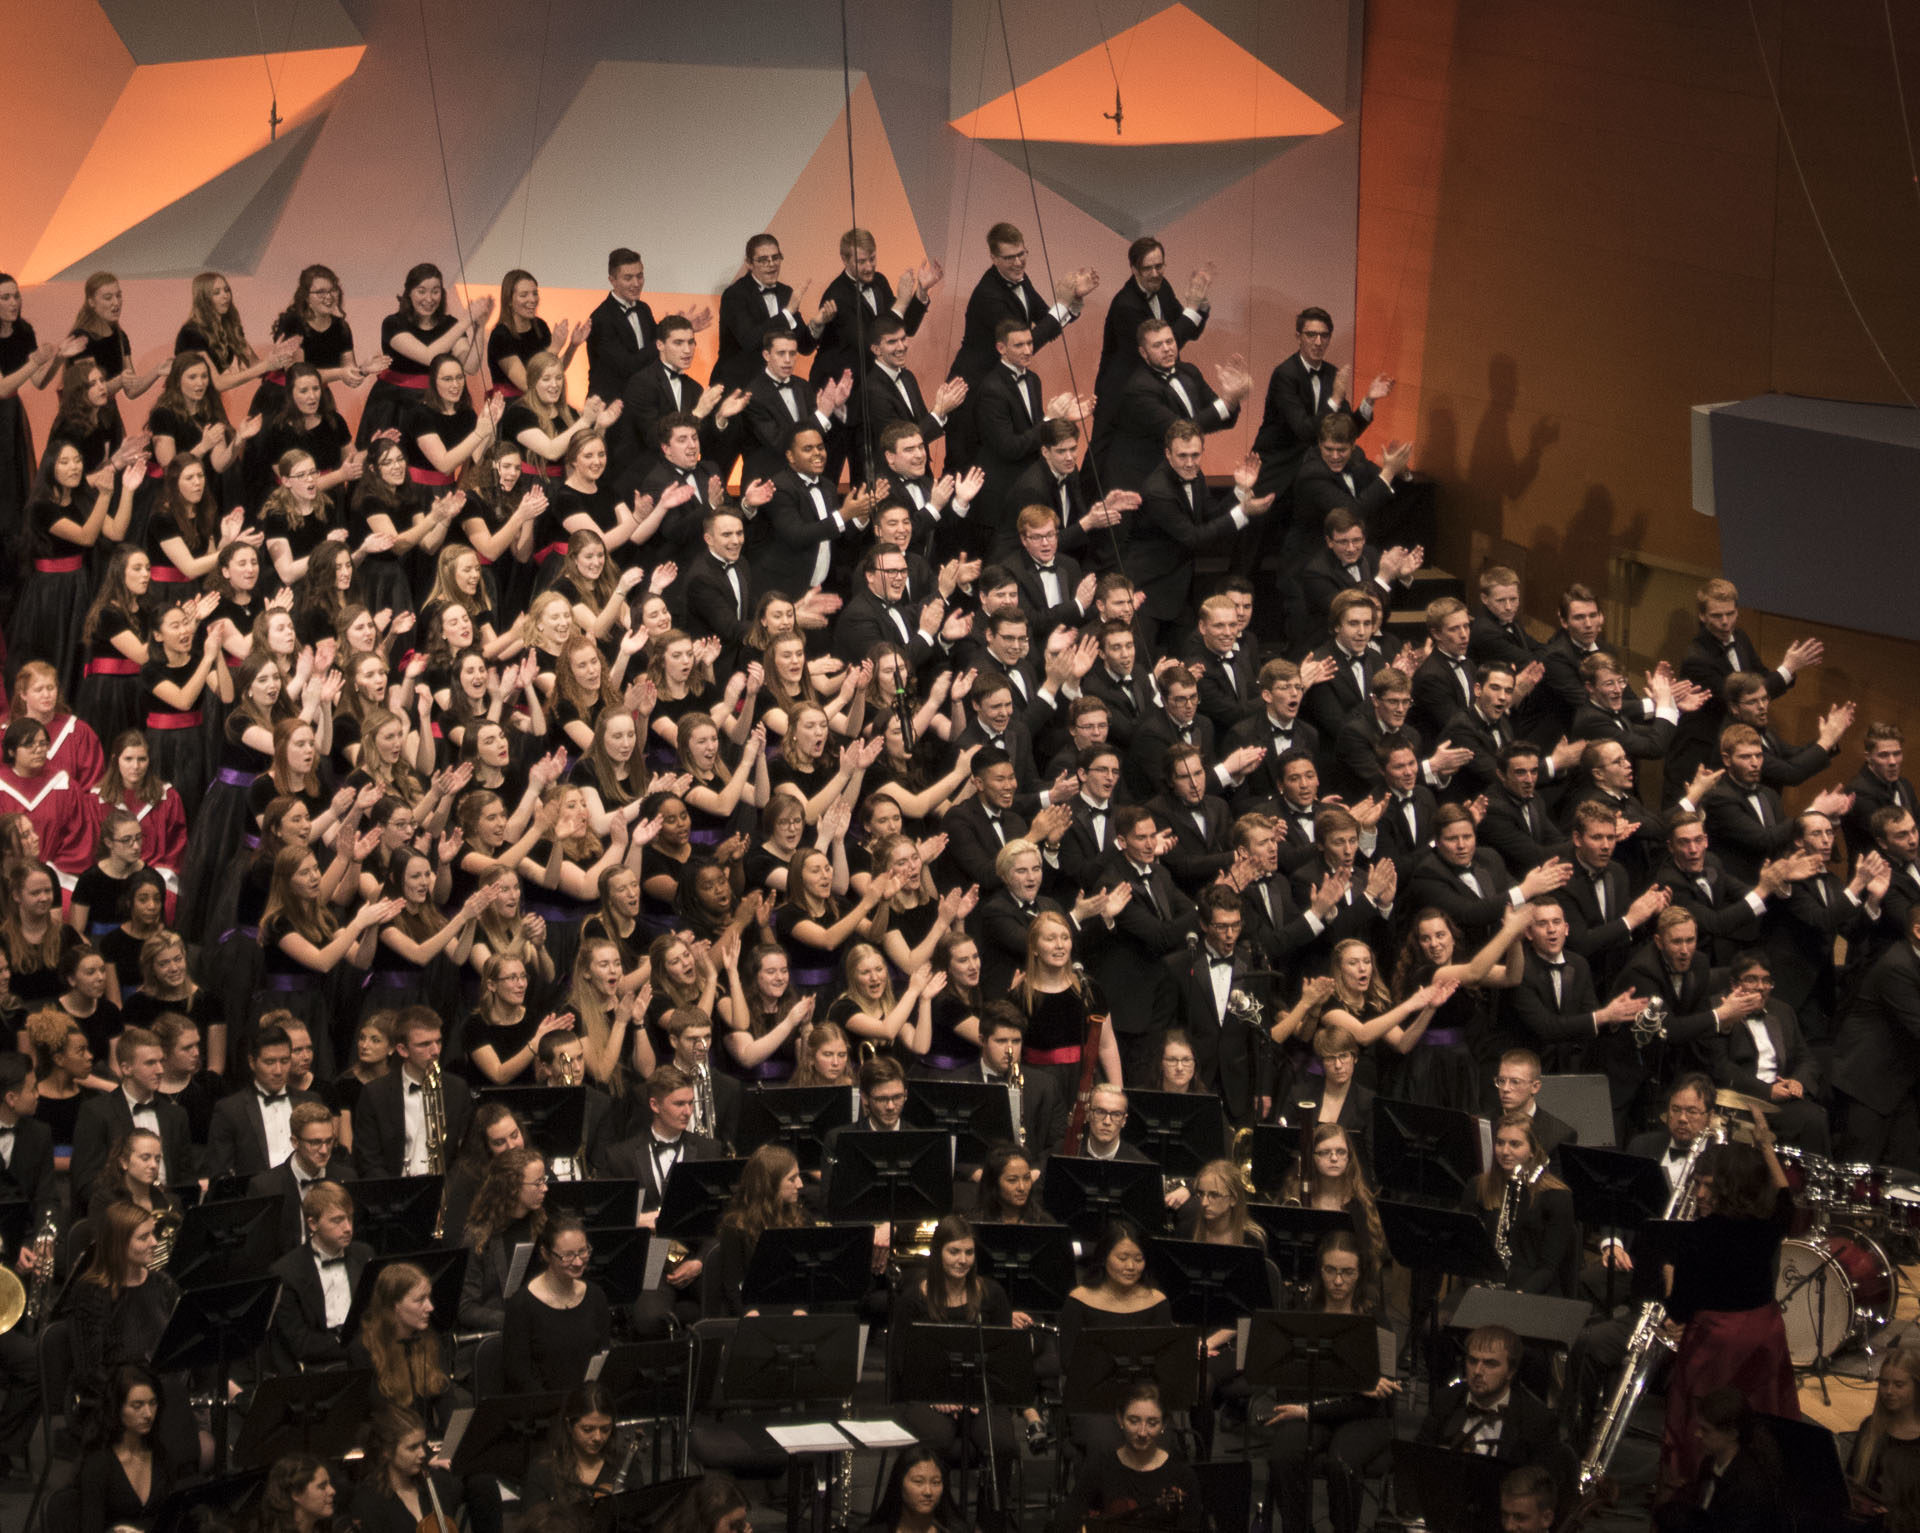 St. Thomas Christmas Concert to air nationally on PBS TommieMedia